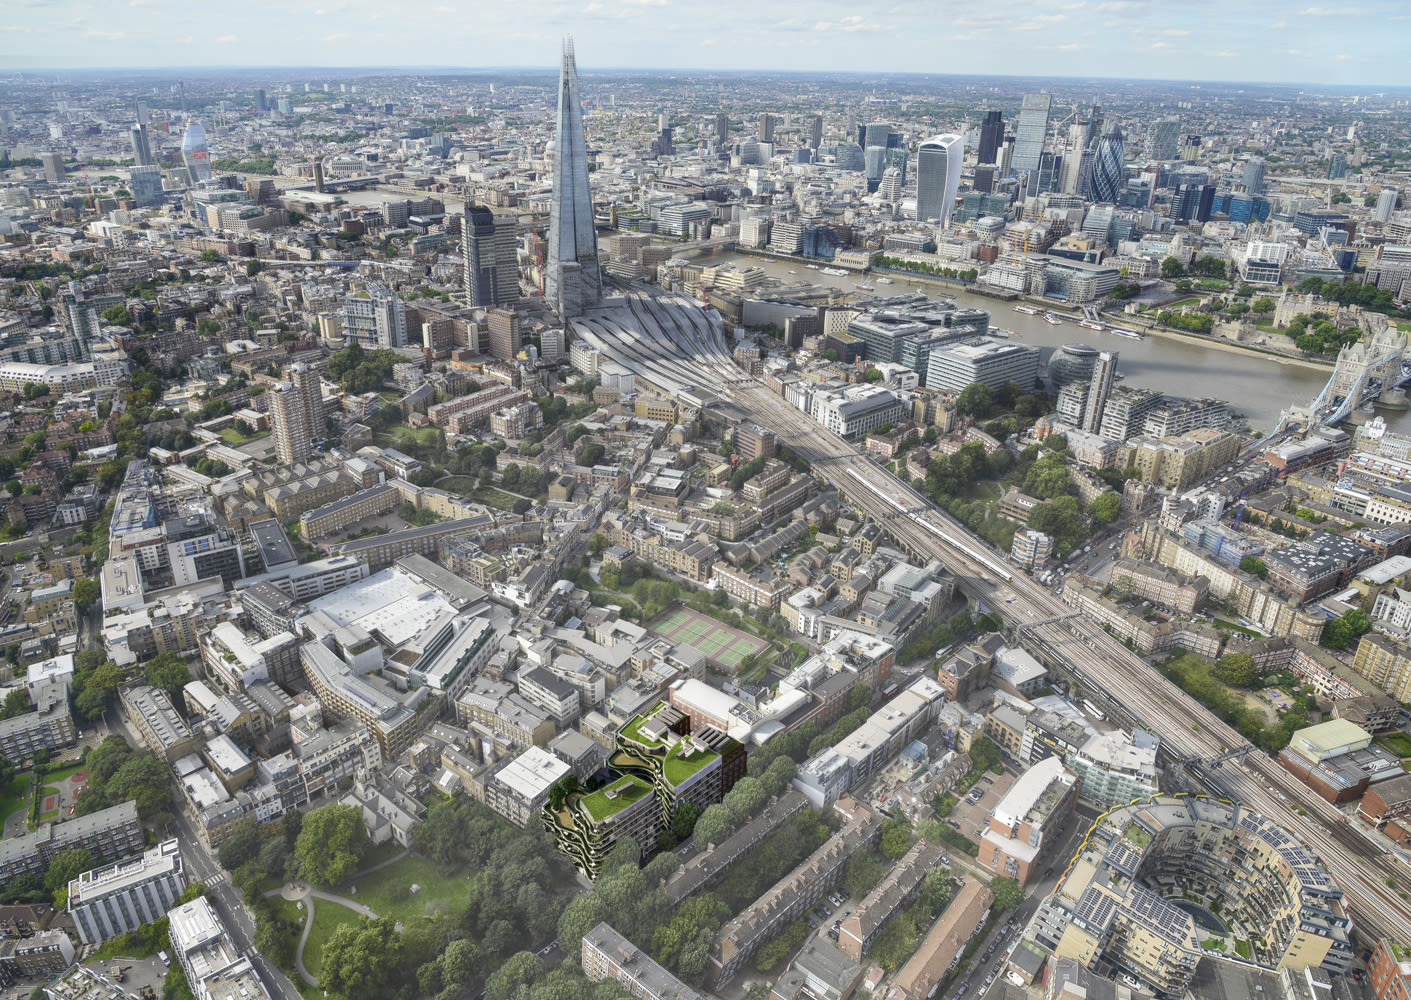 Aerial view of the site with Tower Bridge Road leading to the Thames and the Shard in the background